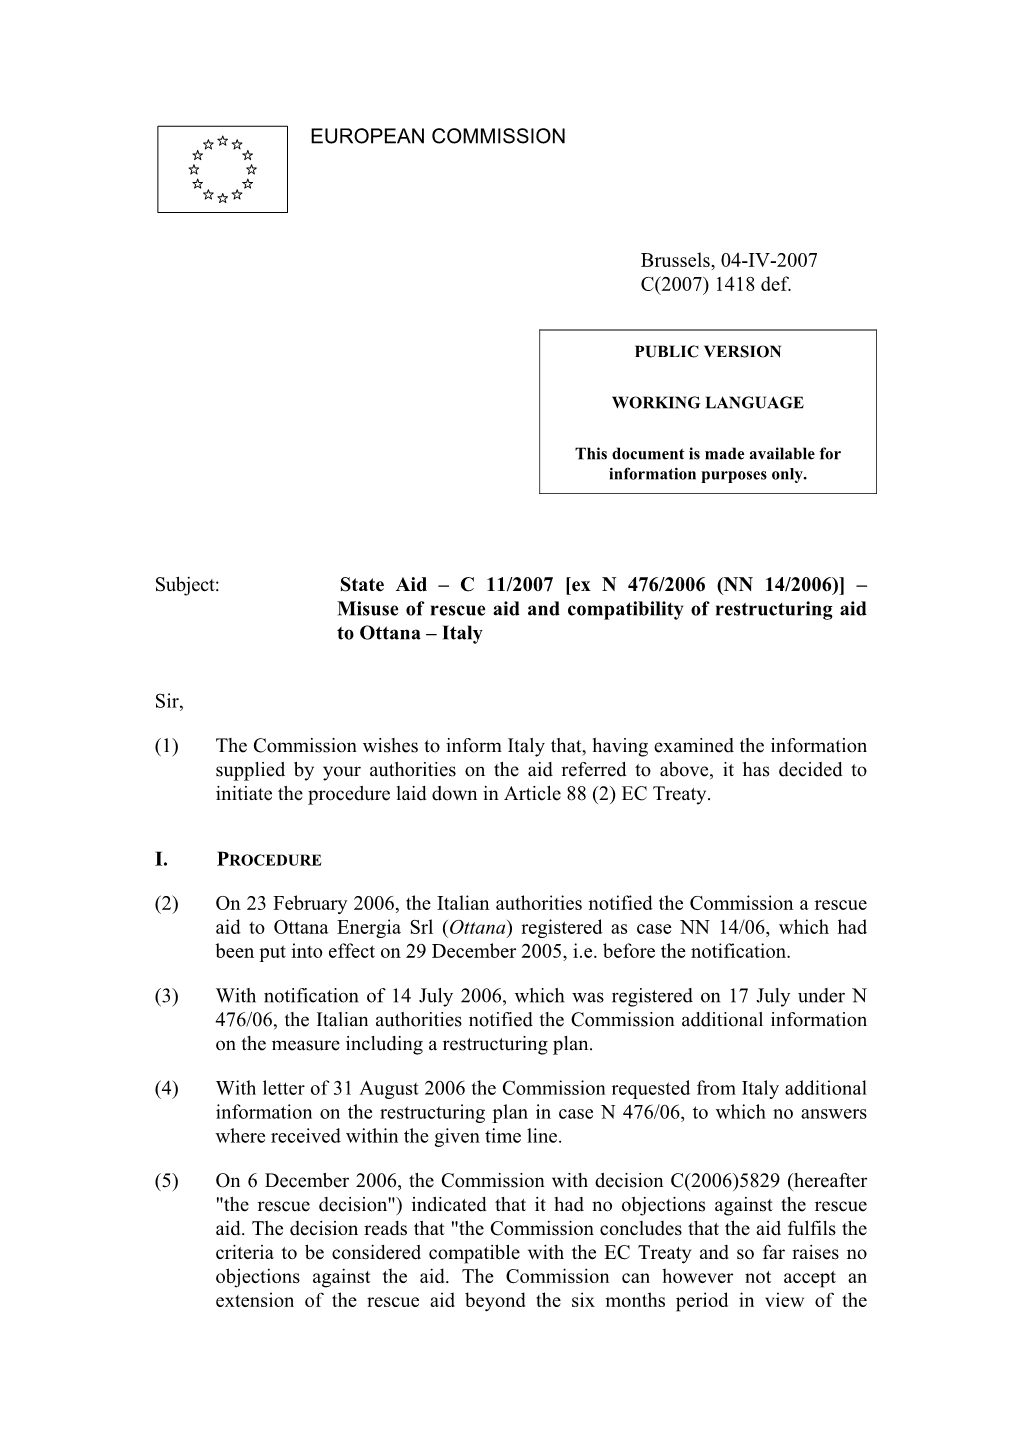 State Aid – C 11/2007 [Ex N 476/2006 (NN 14/2006)] – Misuse of Rescue Aid and Compatibility of Restructuring Aid to Ottana – Italy